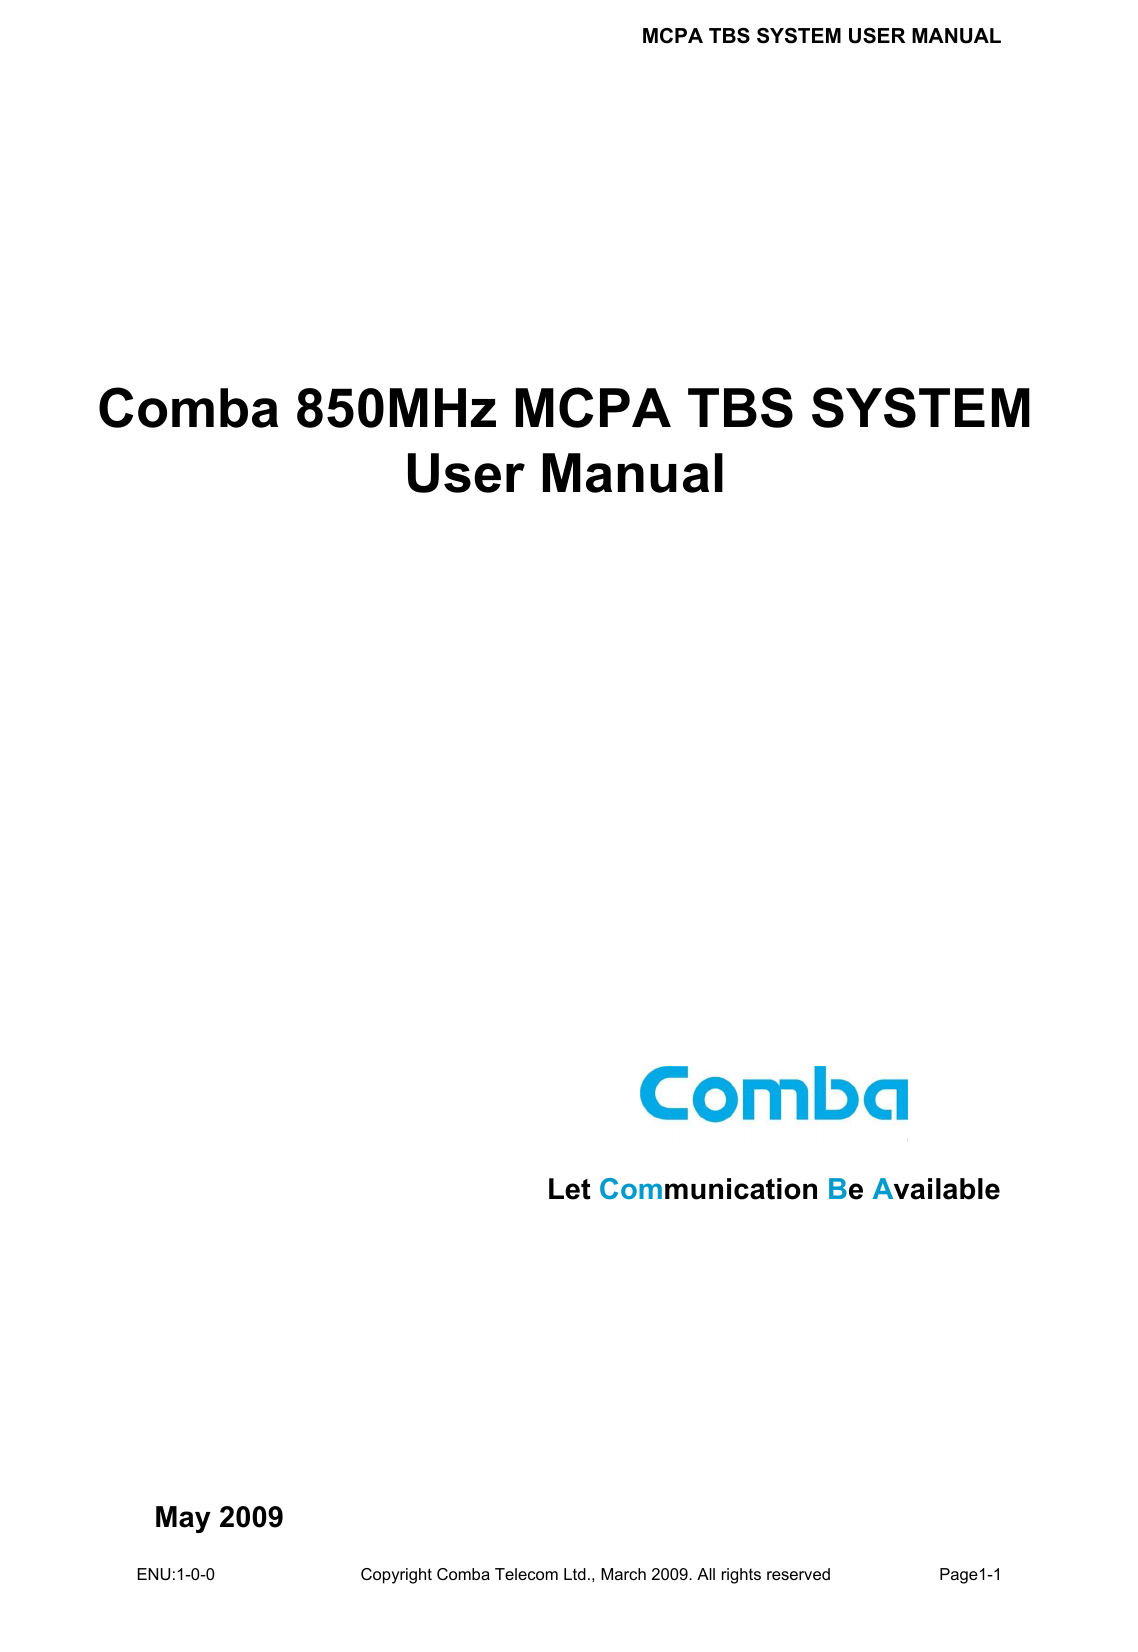 MCPA TBS SYSTEM USER MANUAL ENU:1-0-0 Copyright Comba Telecom Ltd., March 2009. All rights reserved  Page1-1           Comba 850MHz MCPA TBS SYSTEMUser Manual May 2009  Let Communication Be Available 